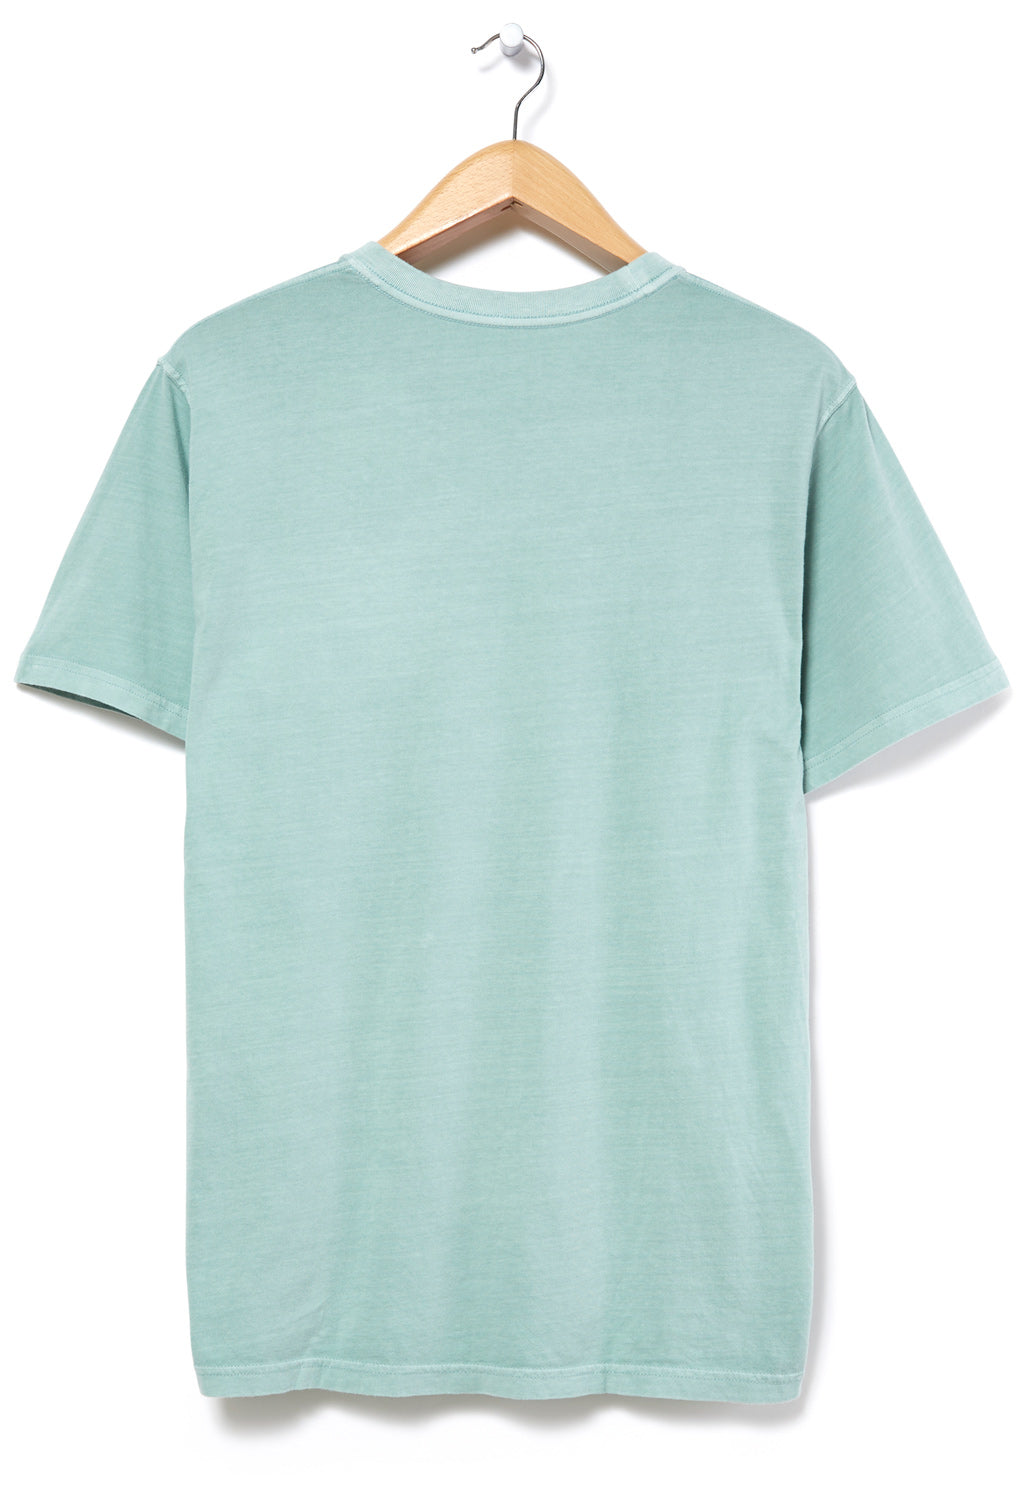 Montbell Men's Wash Out Cotton T-Shirt - Jade